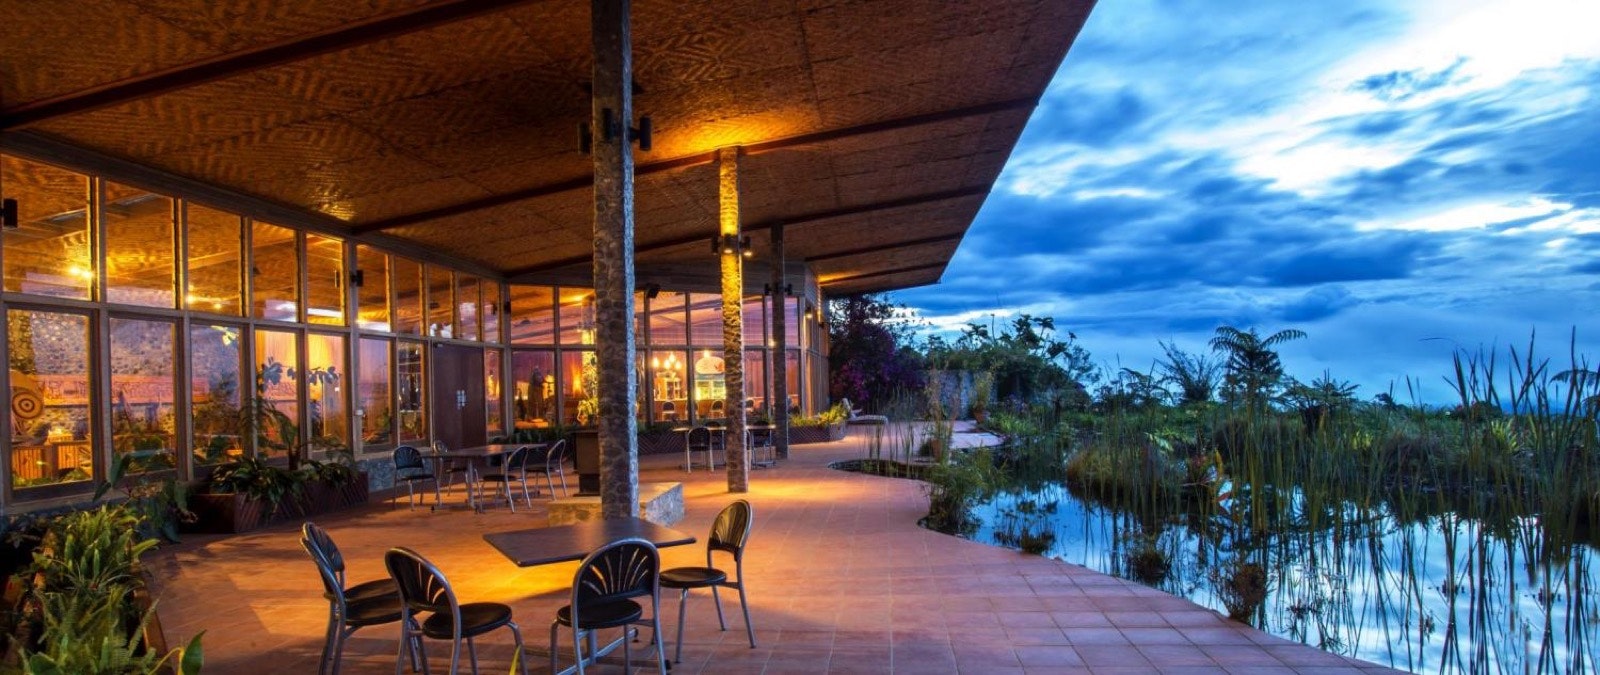 Tables and chairs are arrange around the courtyard overlooking a body of water filled with greenery; eco luxury resorts